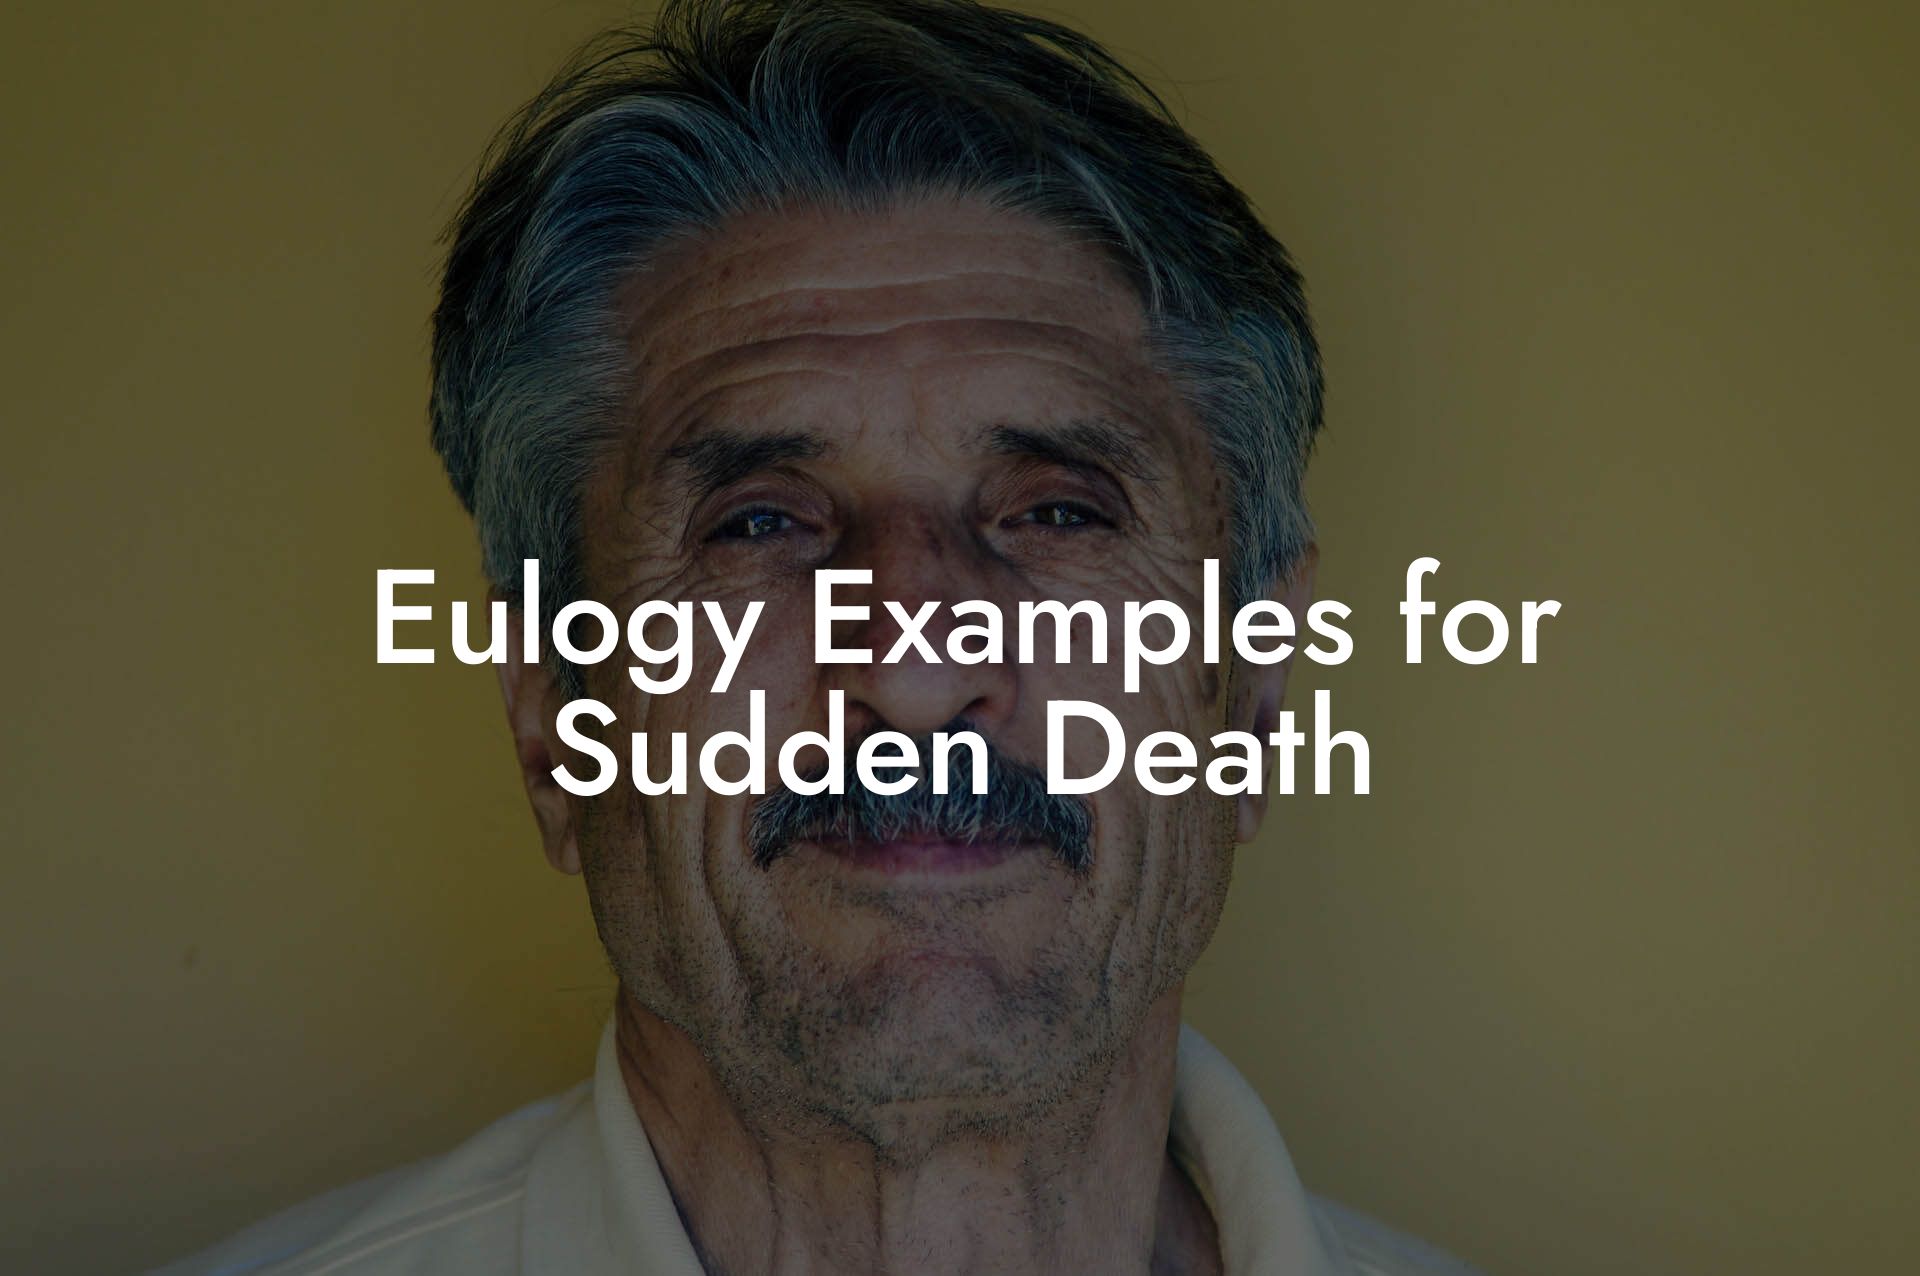 Eulogy Examples for Sudden Death